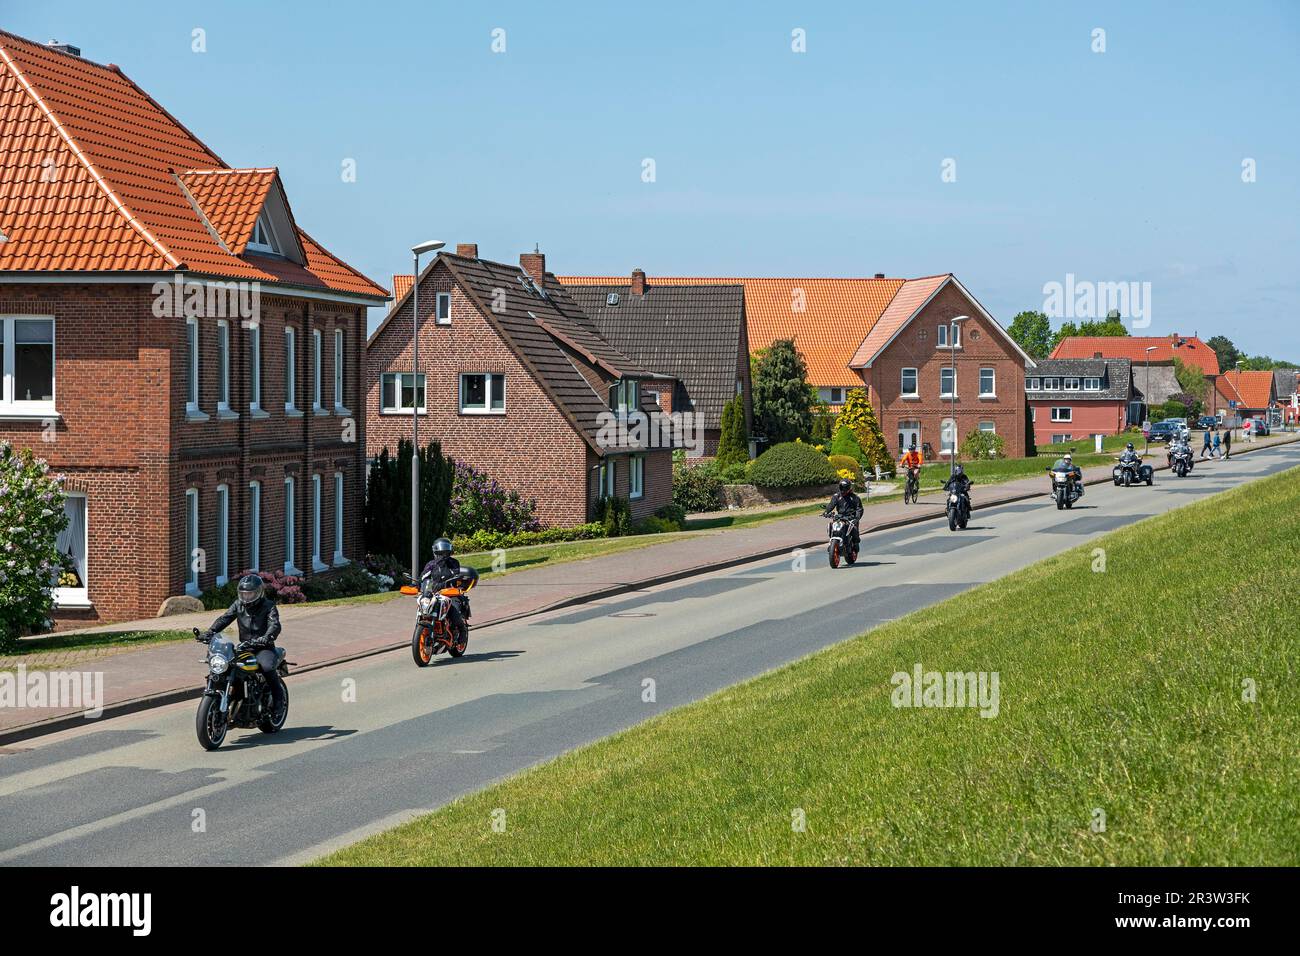 Motorcyclists riding through Hoopte, Winsen (Luhe), Lower Saxony, Germany Stock Photo